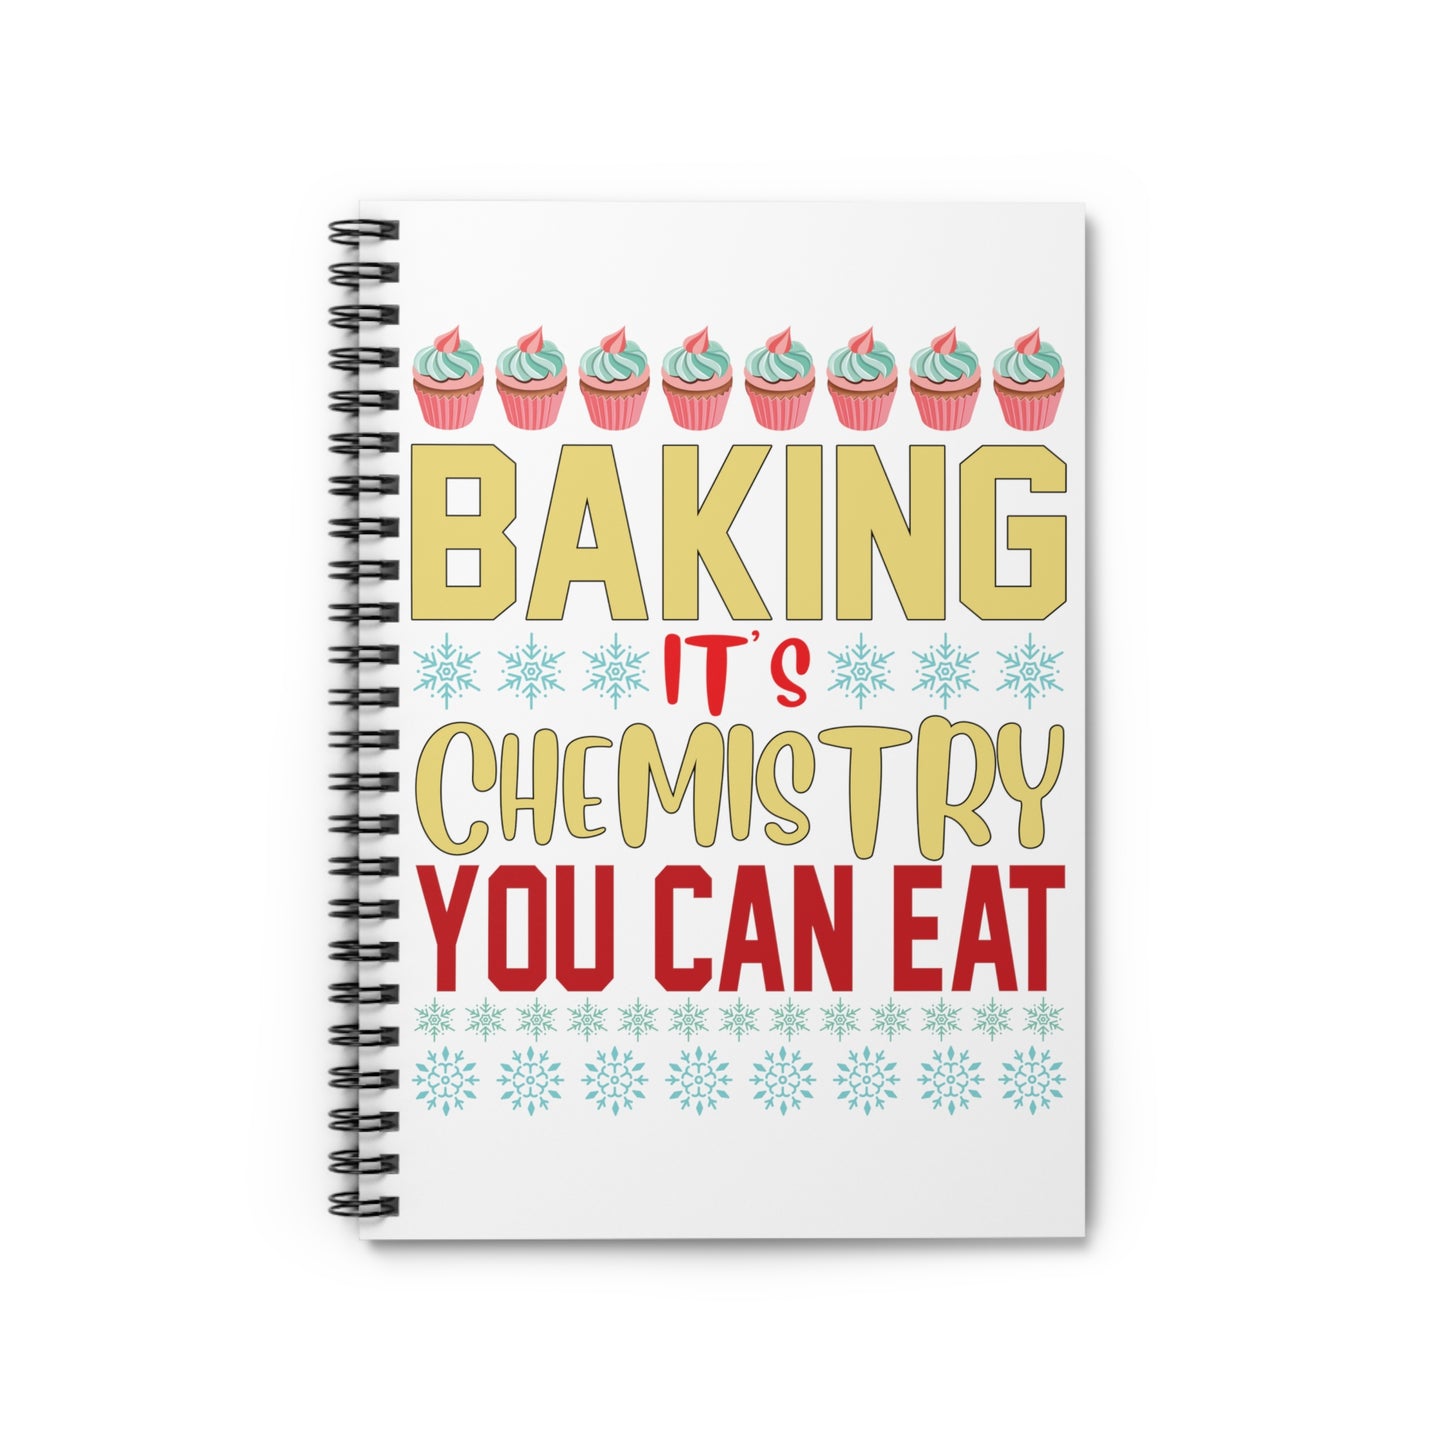 Baking - Chemistry You Can Eat: Spiral Notebook - Log Books - Journals - Diaries - and More Custom Printed by TheGlassyLass